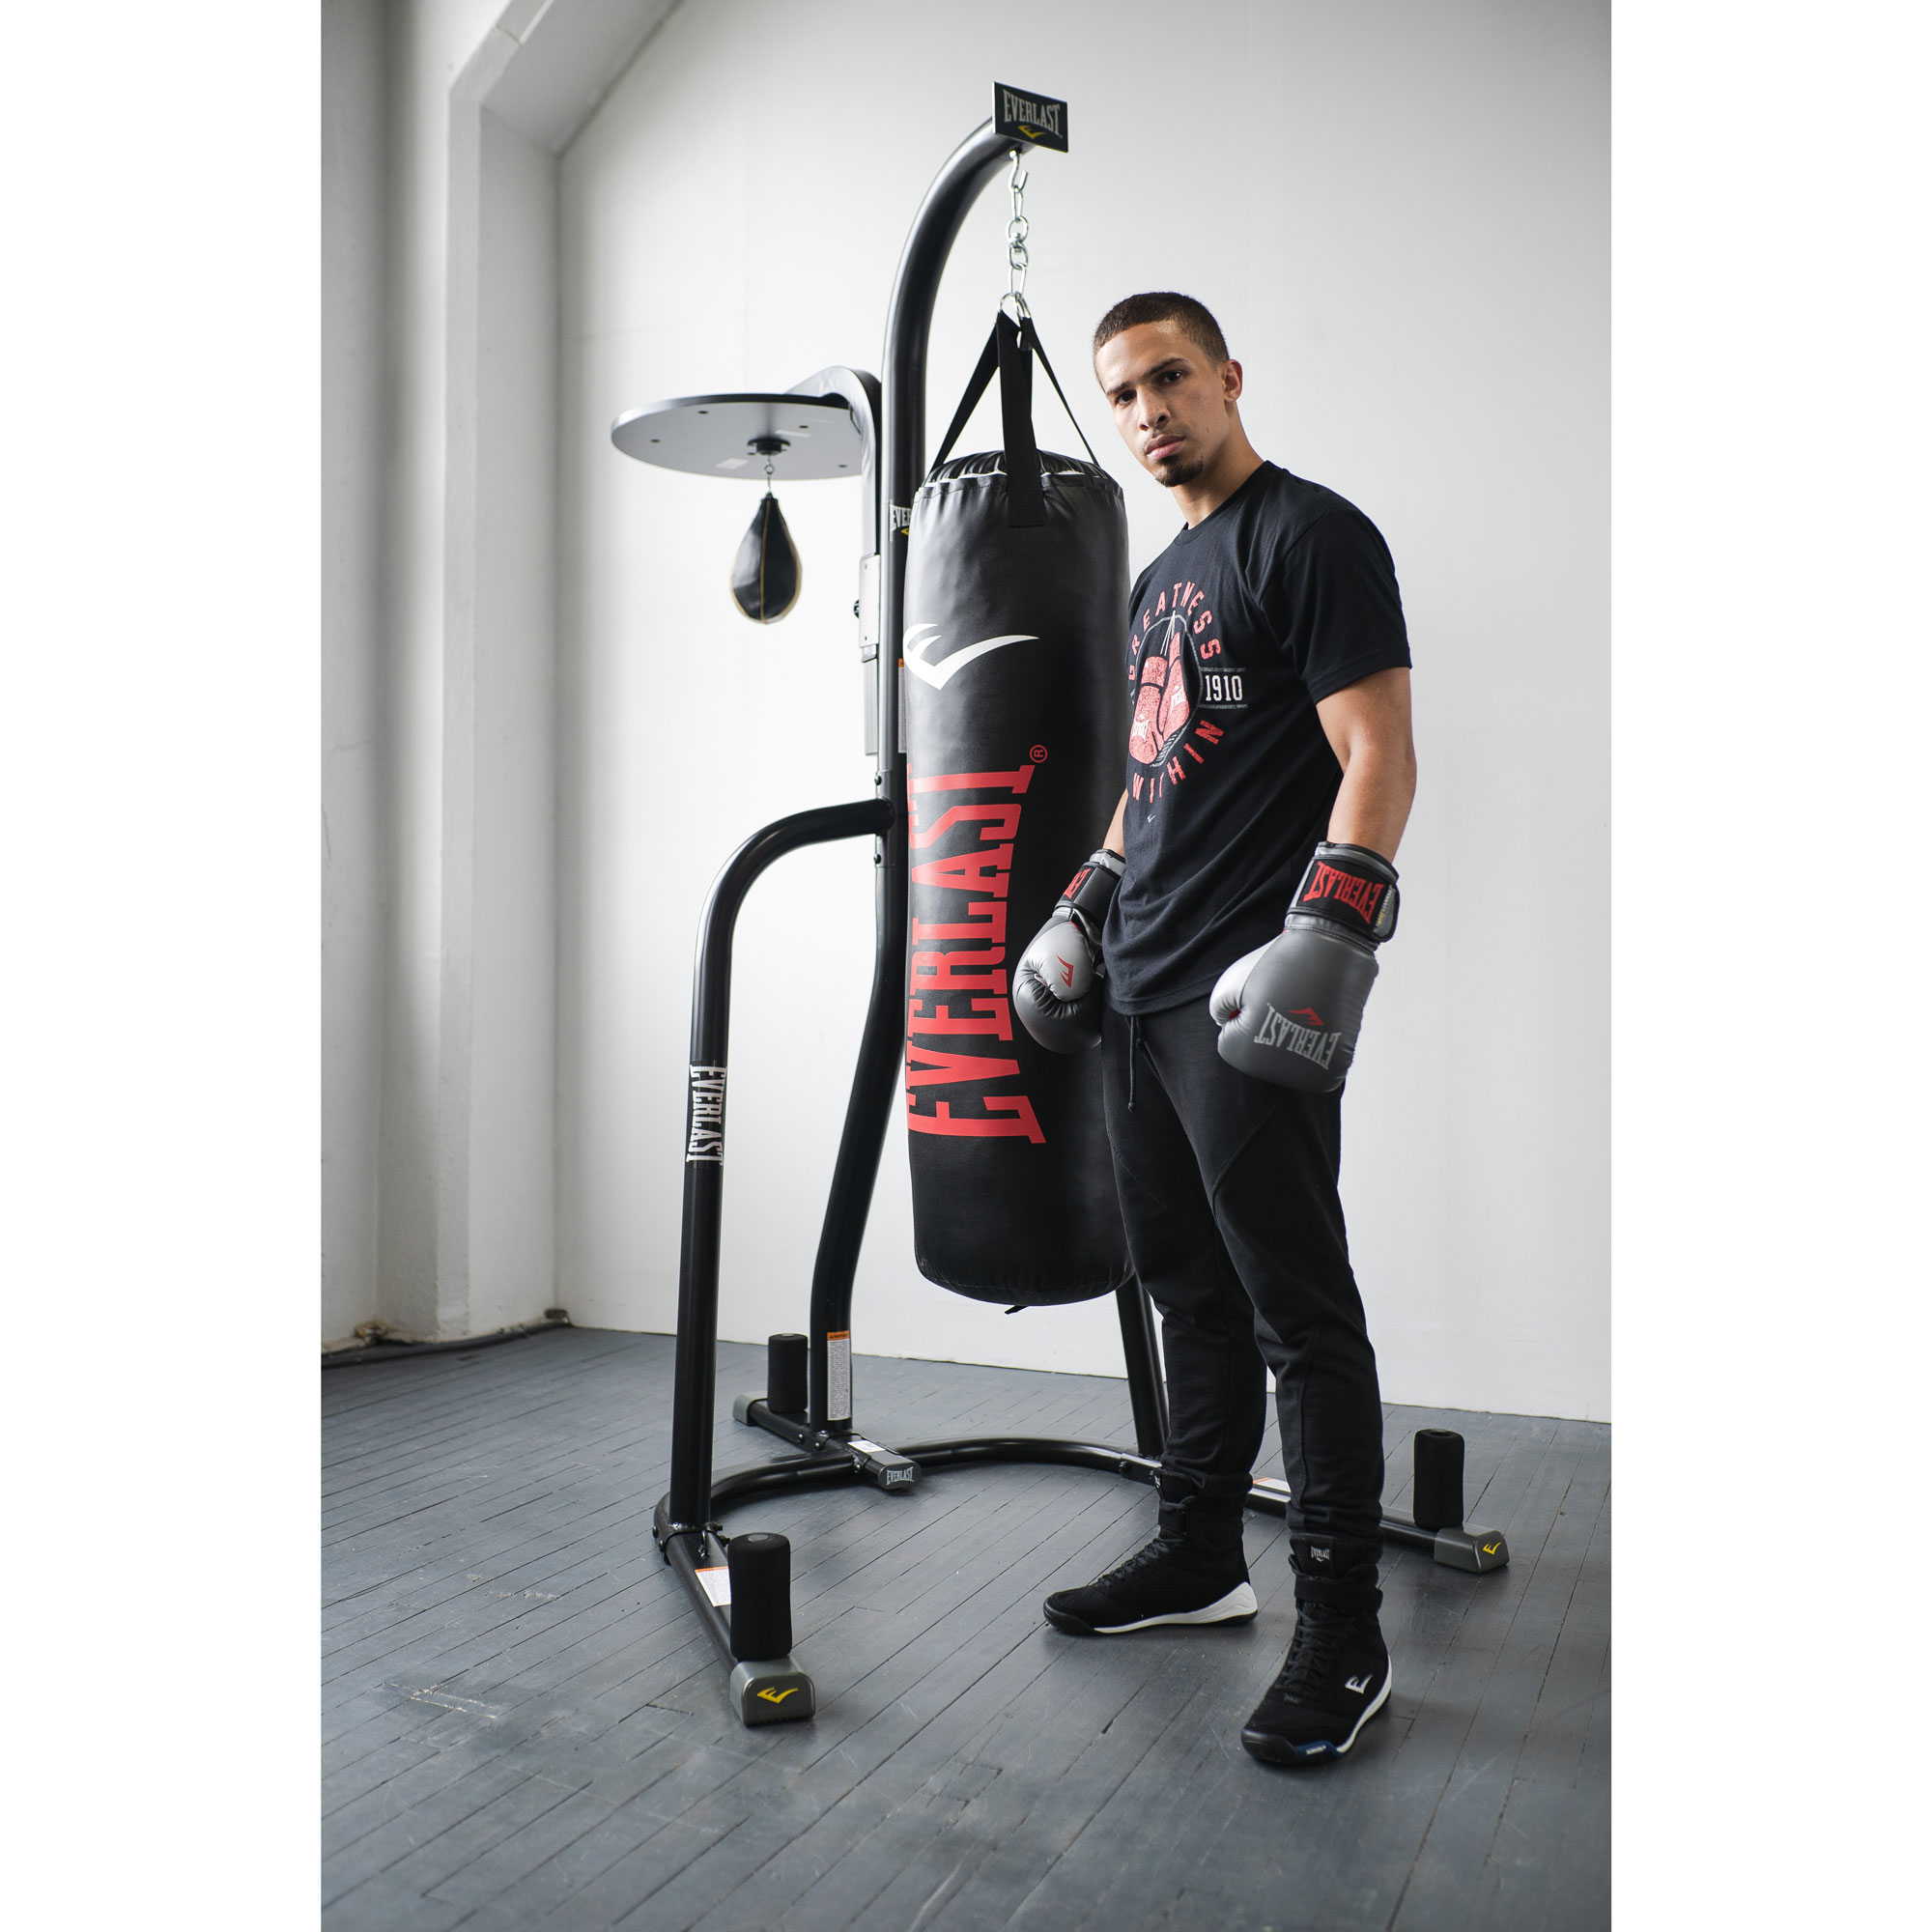 Everlast 2 Station Dual Heavy Duty Powder Coated Steel Heavy and Speed Bag Stand - image 3 of 4